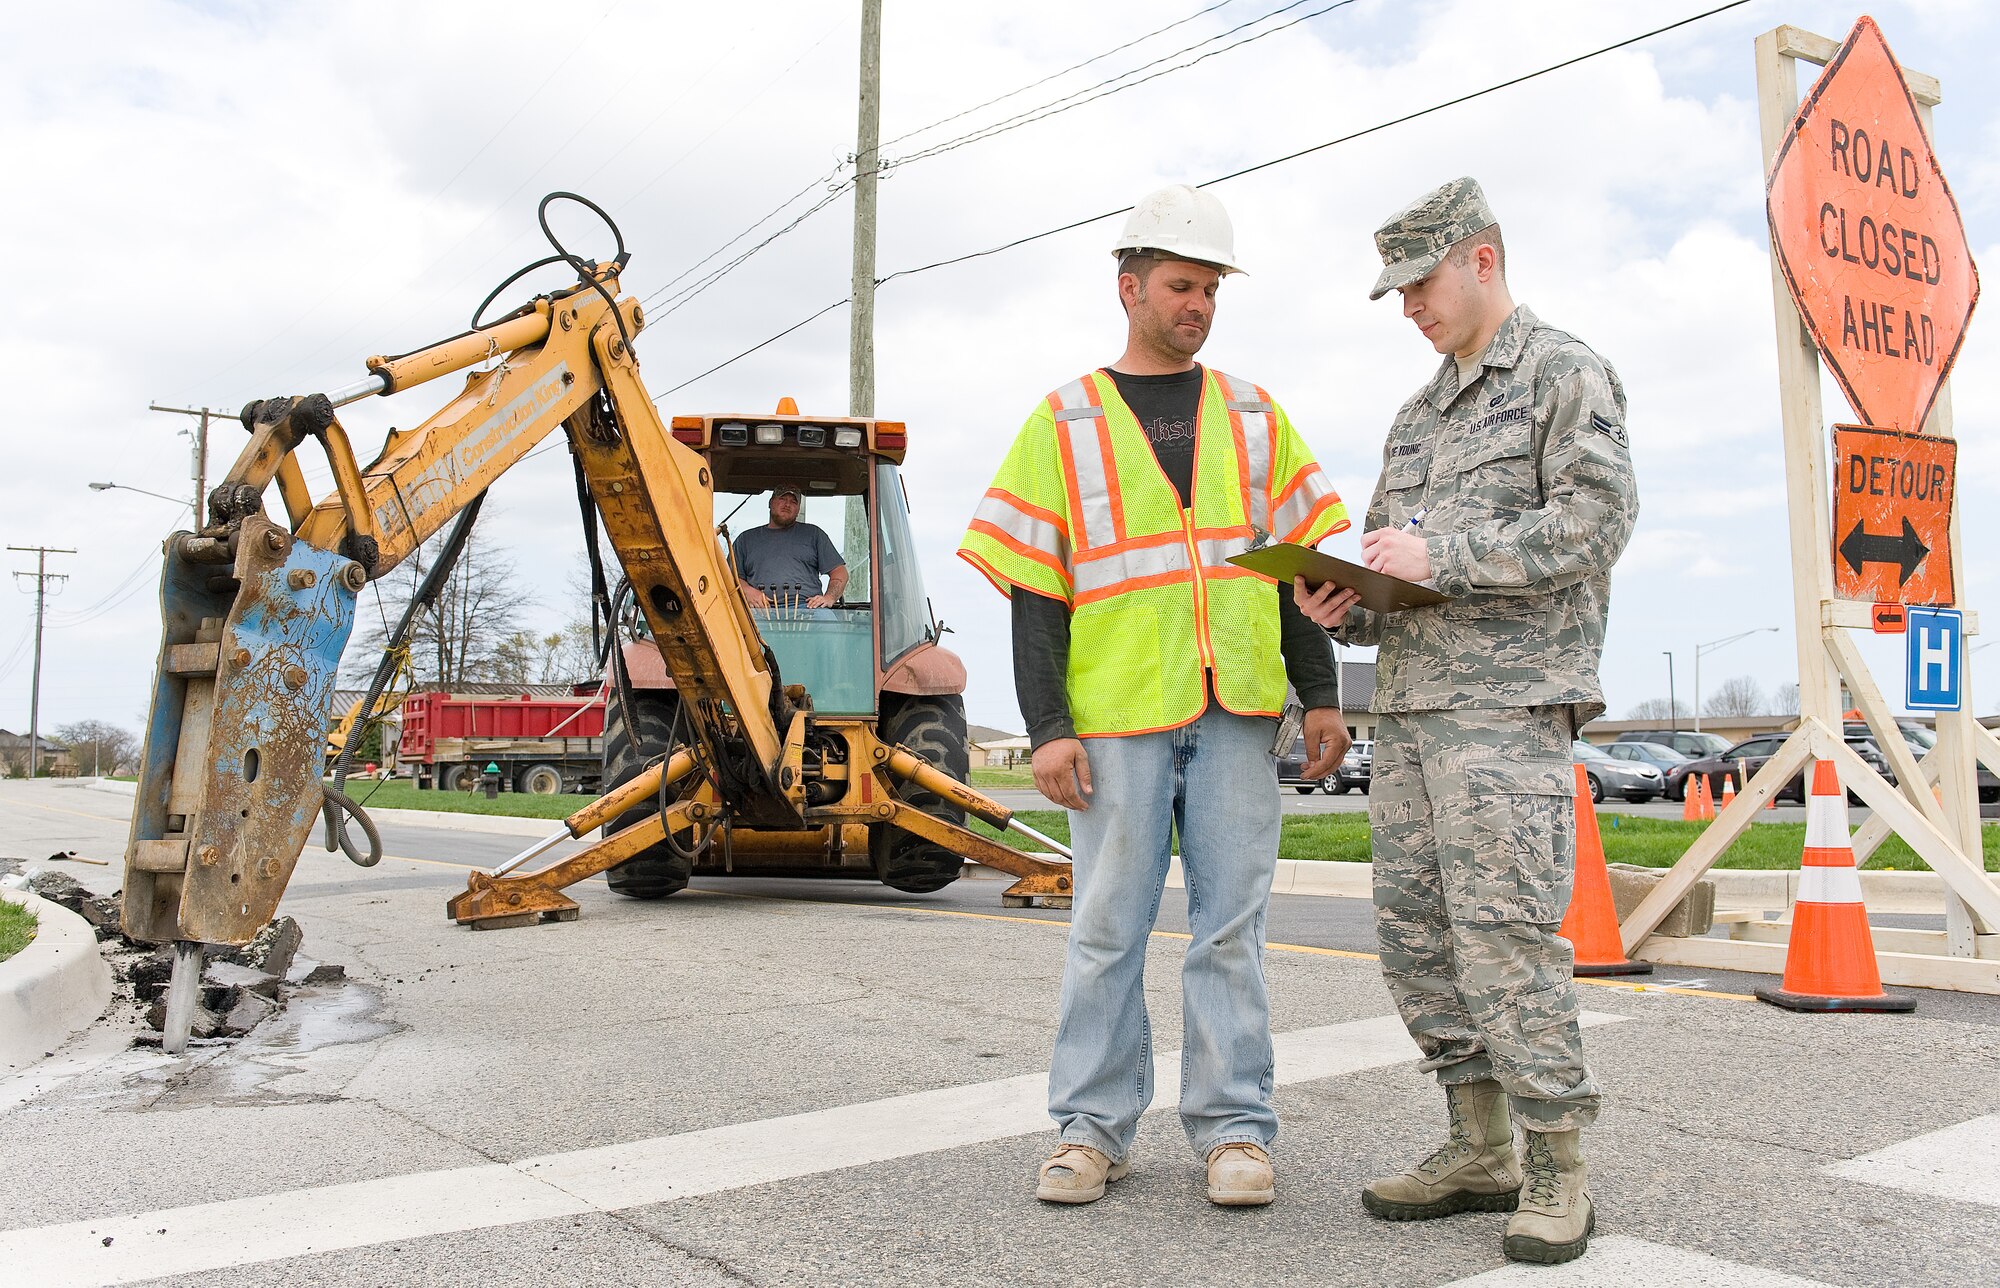 Airman 1st Class George De Young, right, a contract specialist with the 436th Contracting Squadron, talks with Ryan Meisinger, a concrete finisher with Mitten Construction Company, April 16, 2013, at Dover Air Force Base, Del. De Young conducted a site visit for the purpose of a labor interview to ensure the contractor is in compliance with the regional Davis-Bacon Act wage determination. (U.S. Air Force photo/Roland Balik)